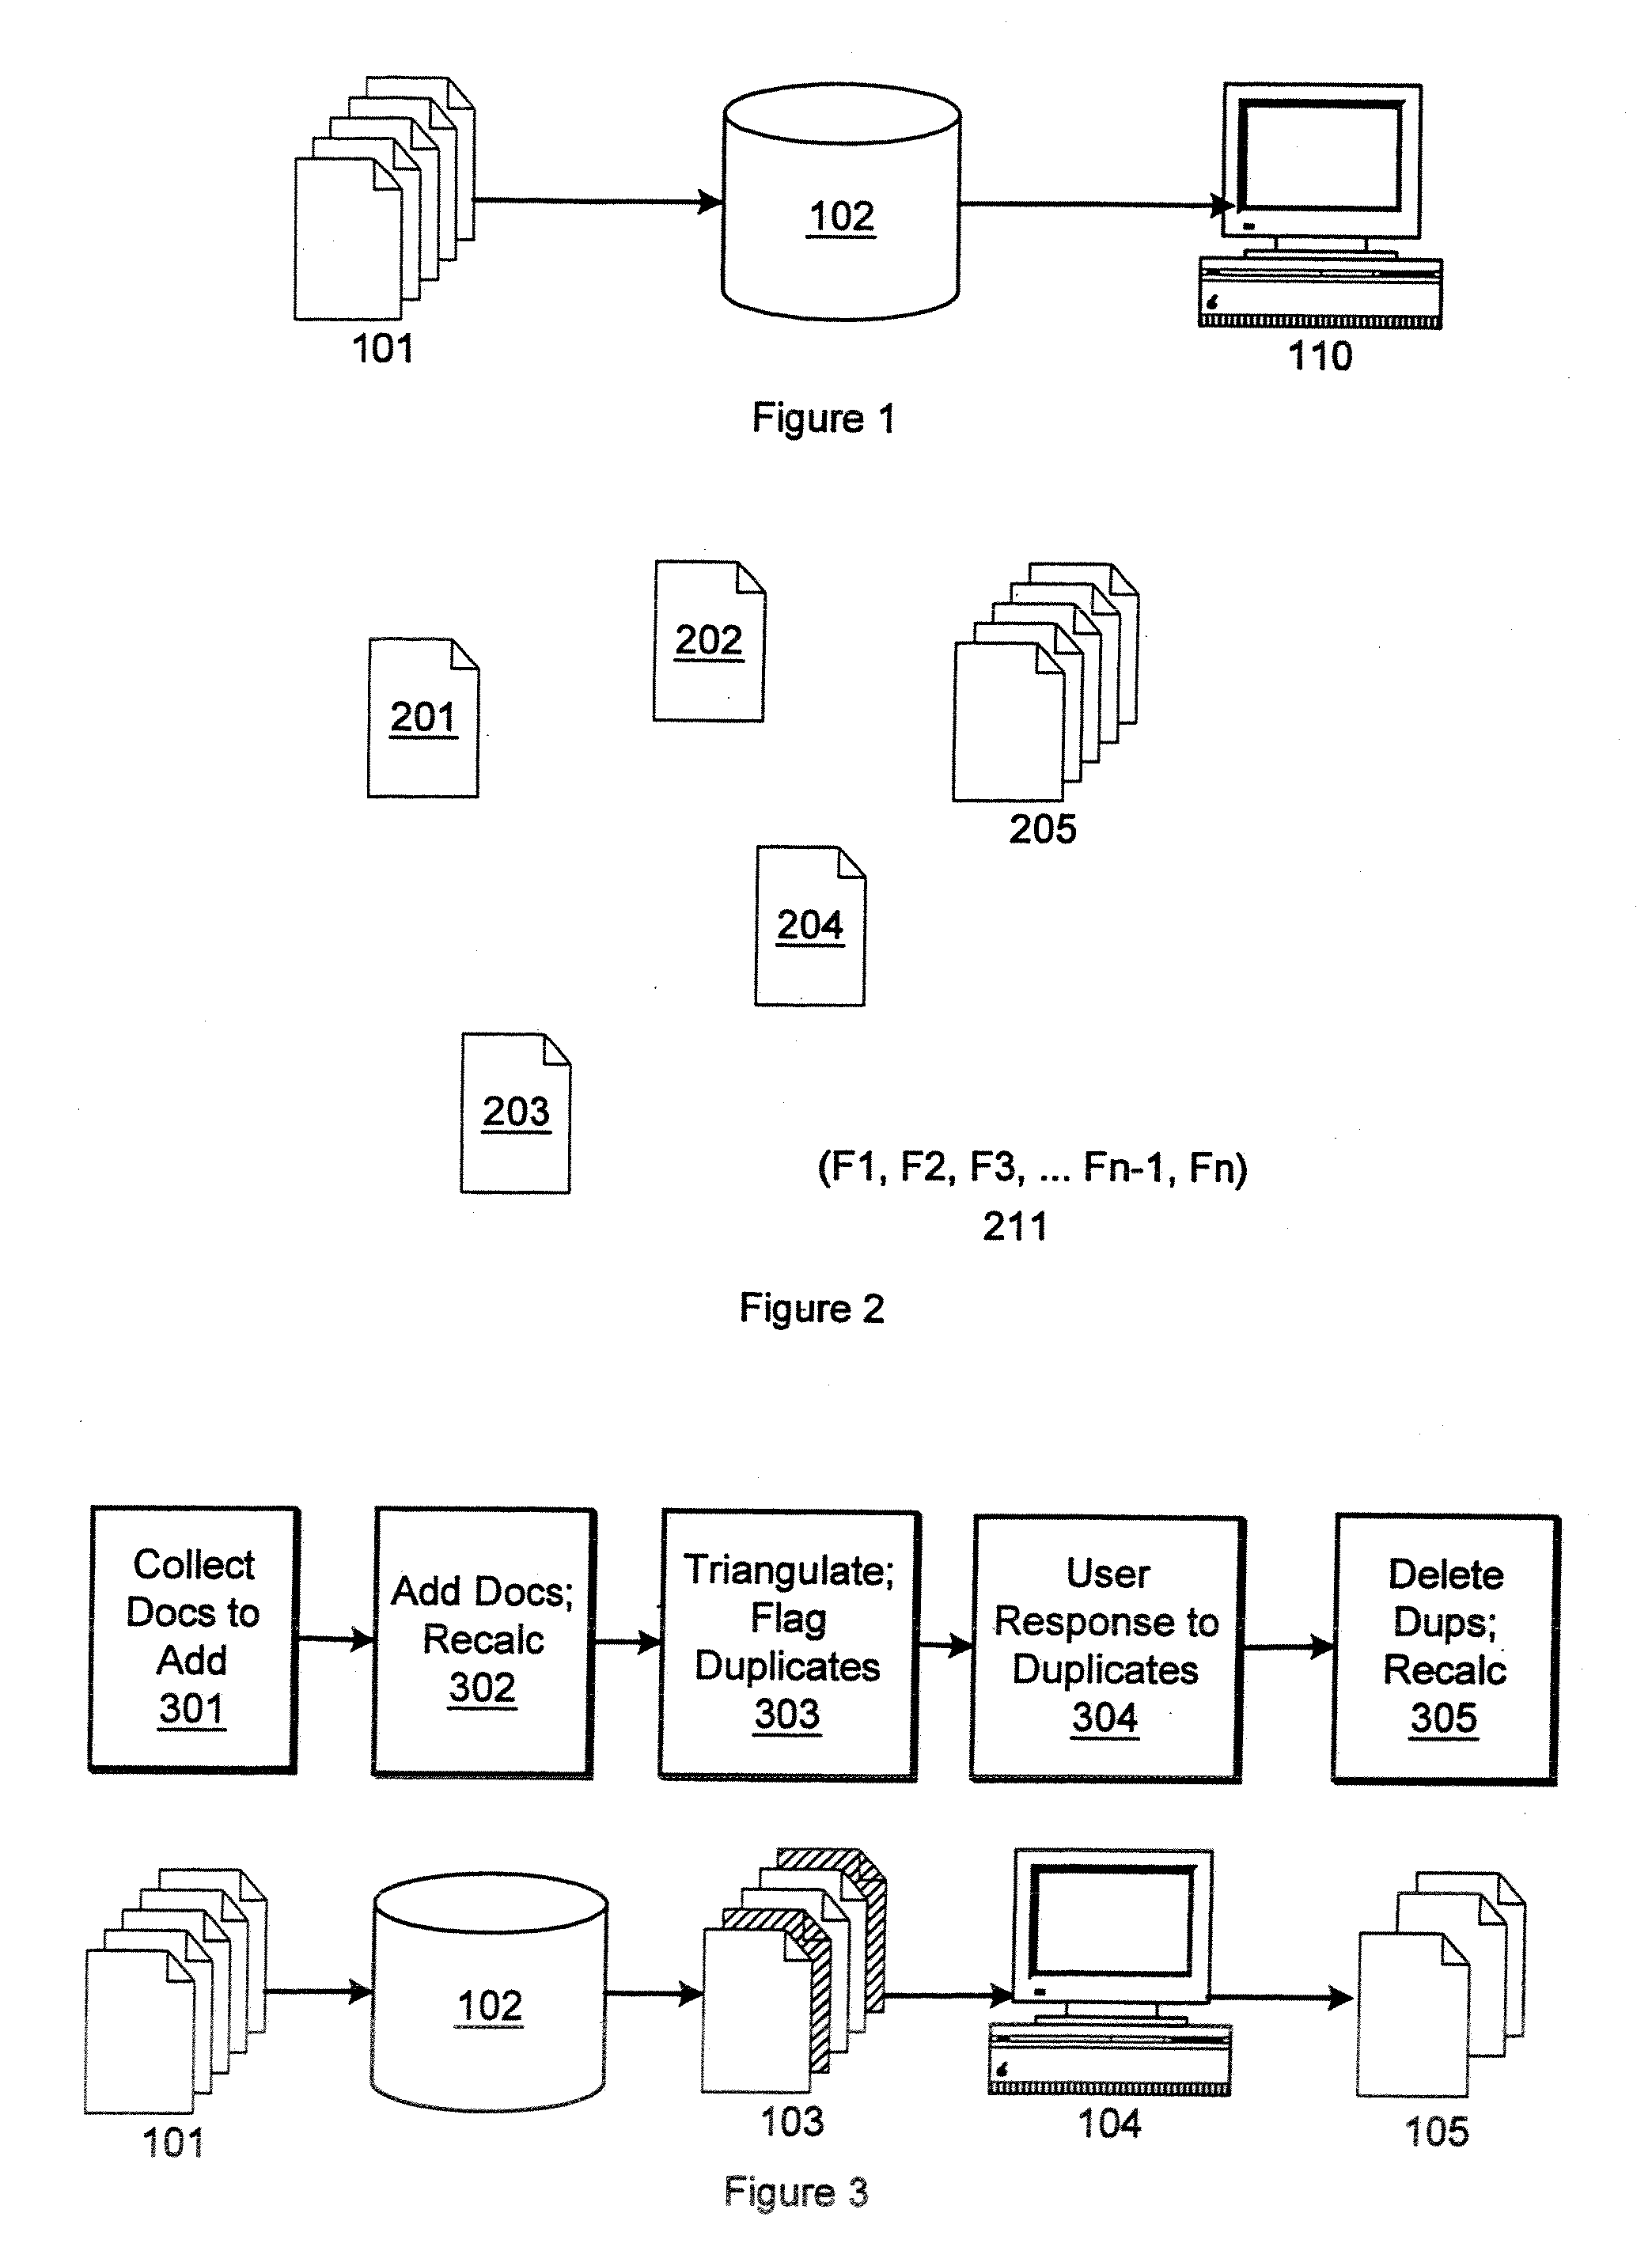 Method and apparatus for duplicate detection